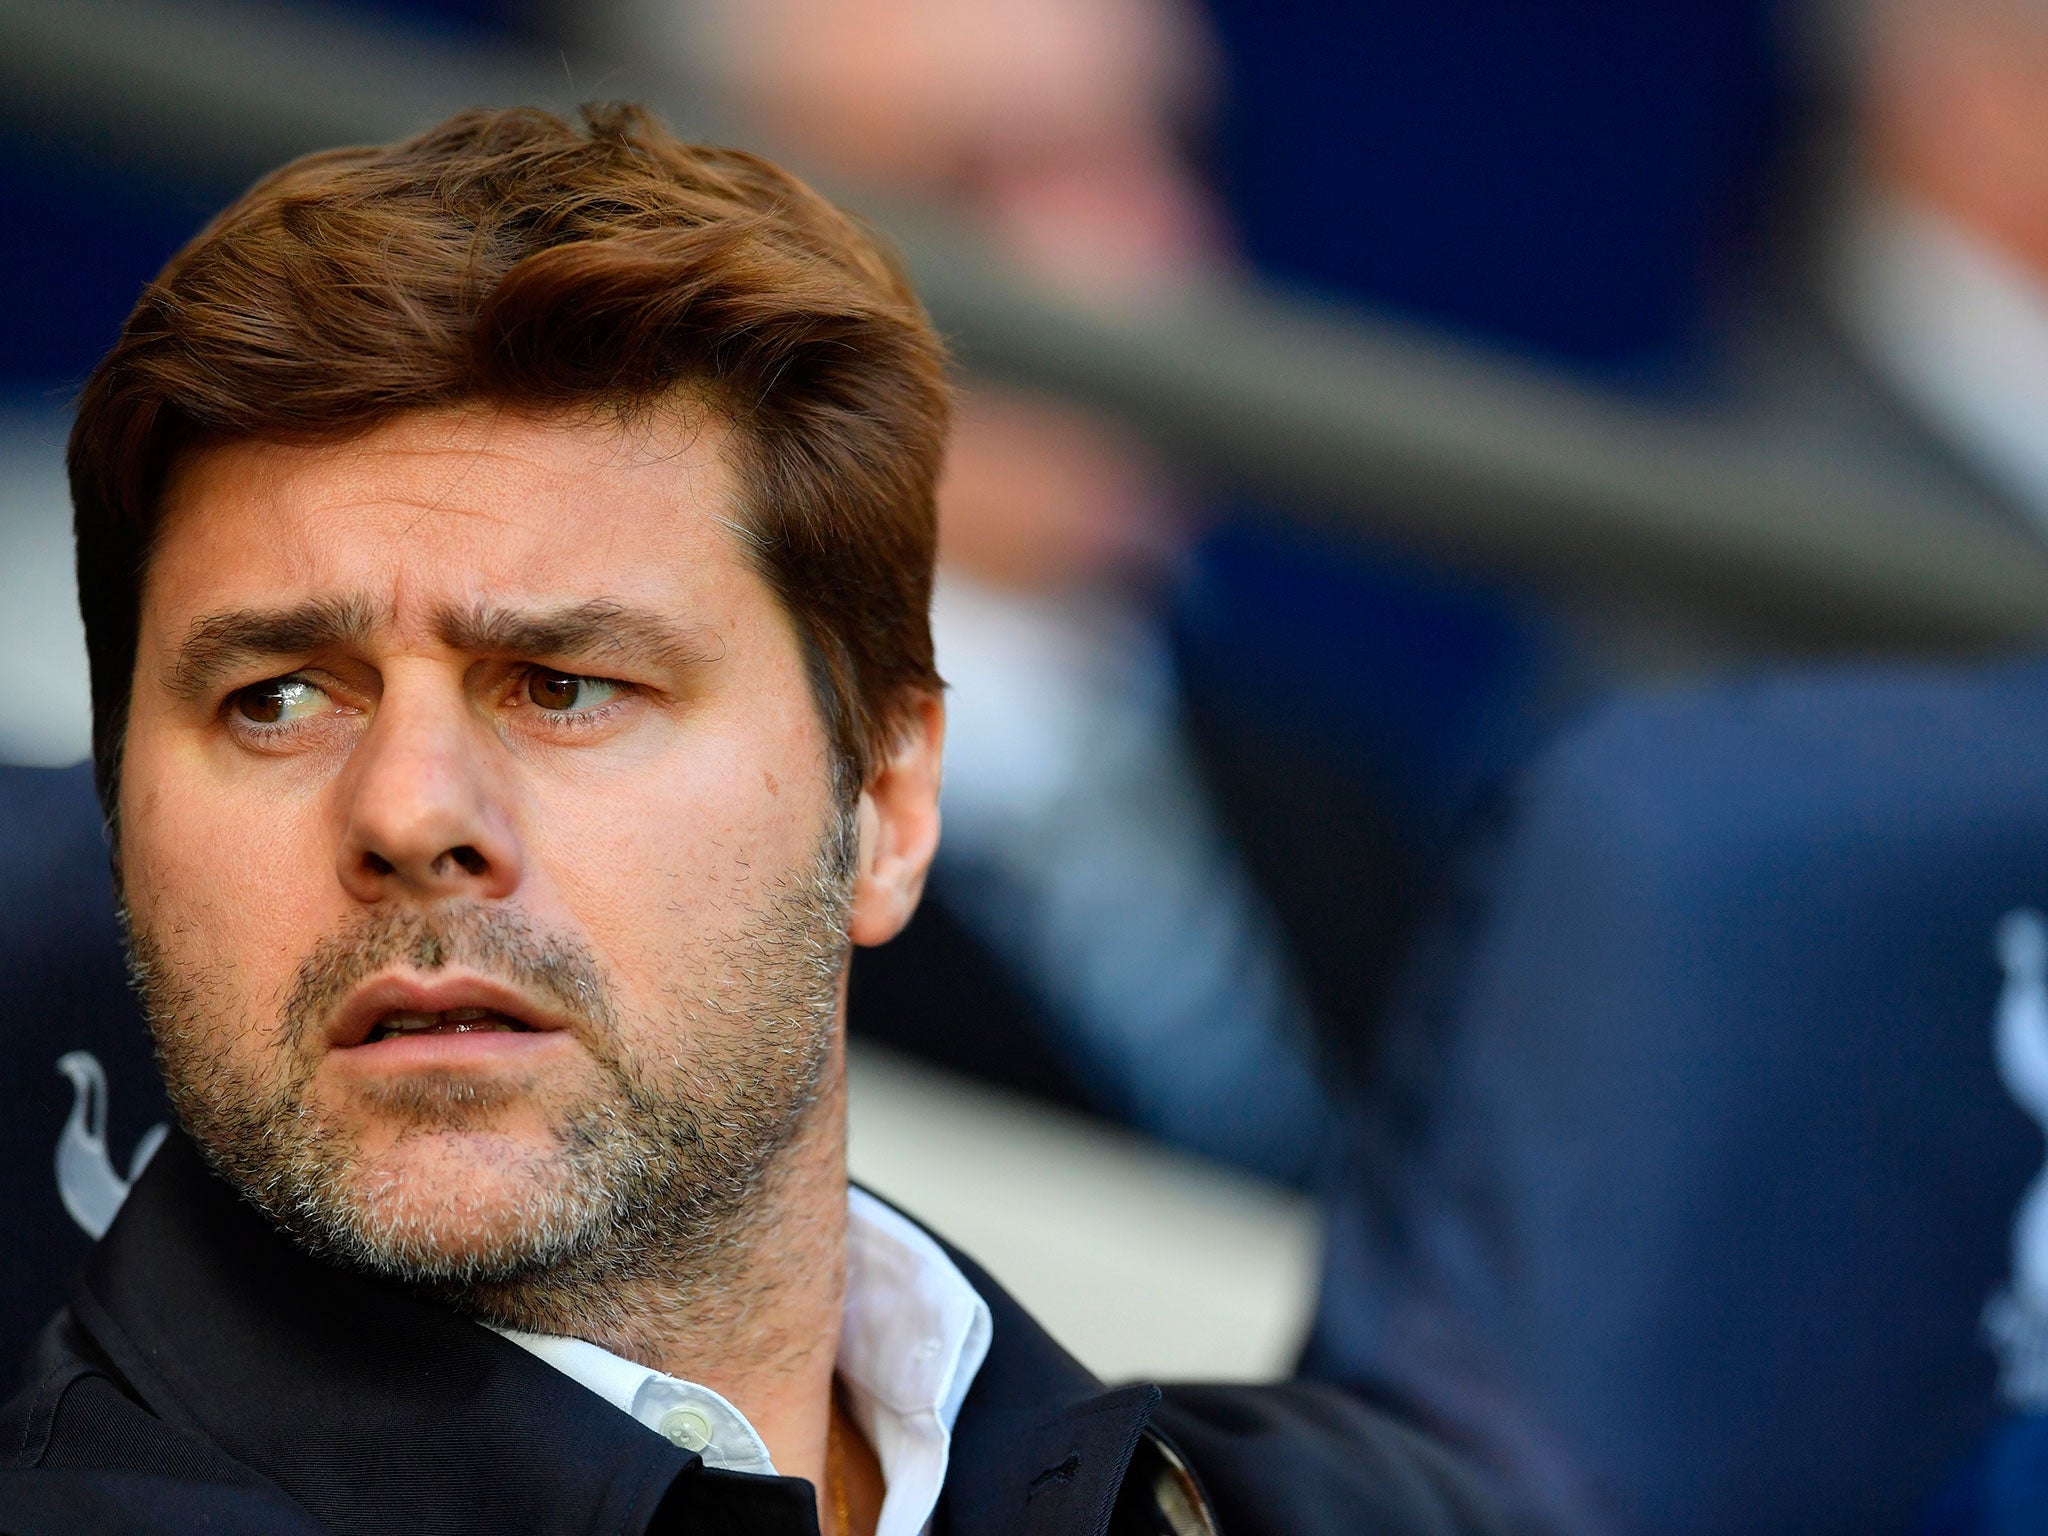 The Tottenham boss believes his side are settling into life at Wembley